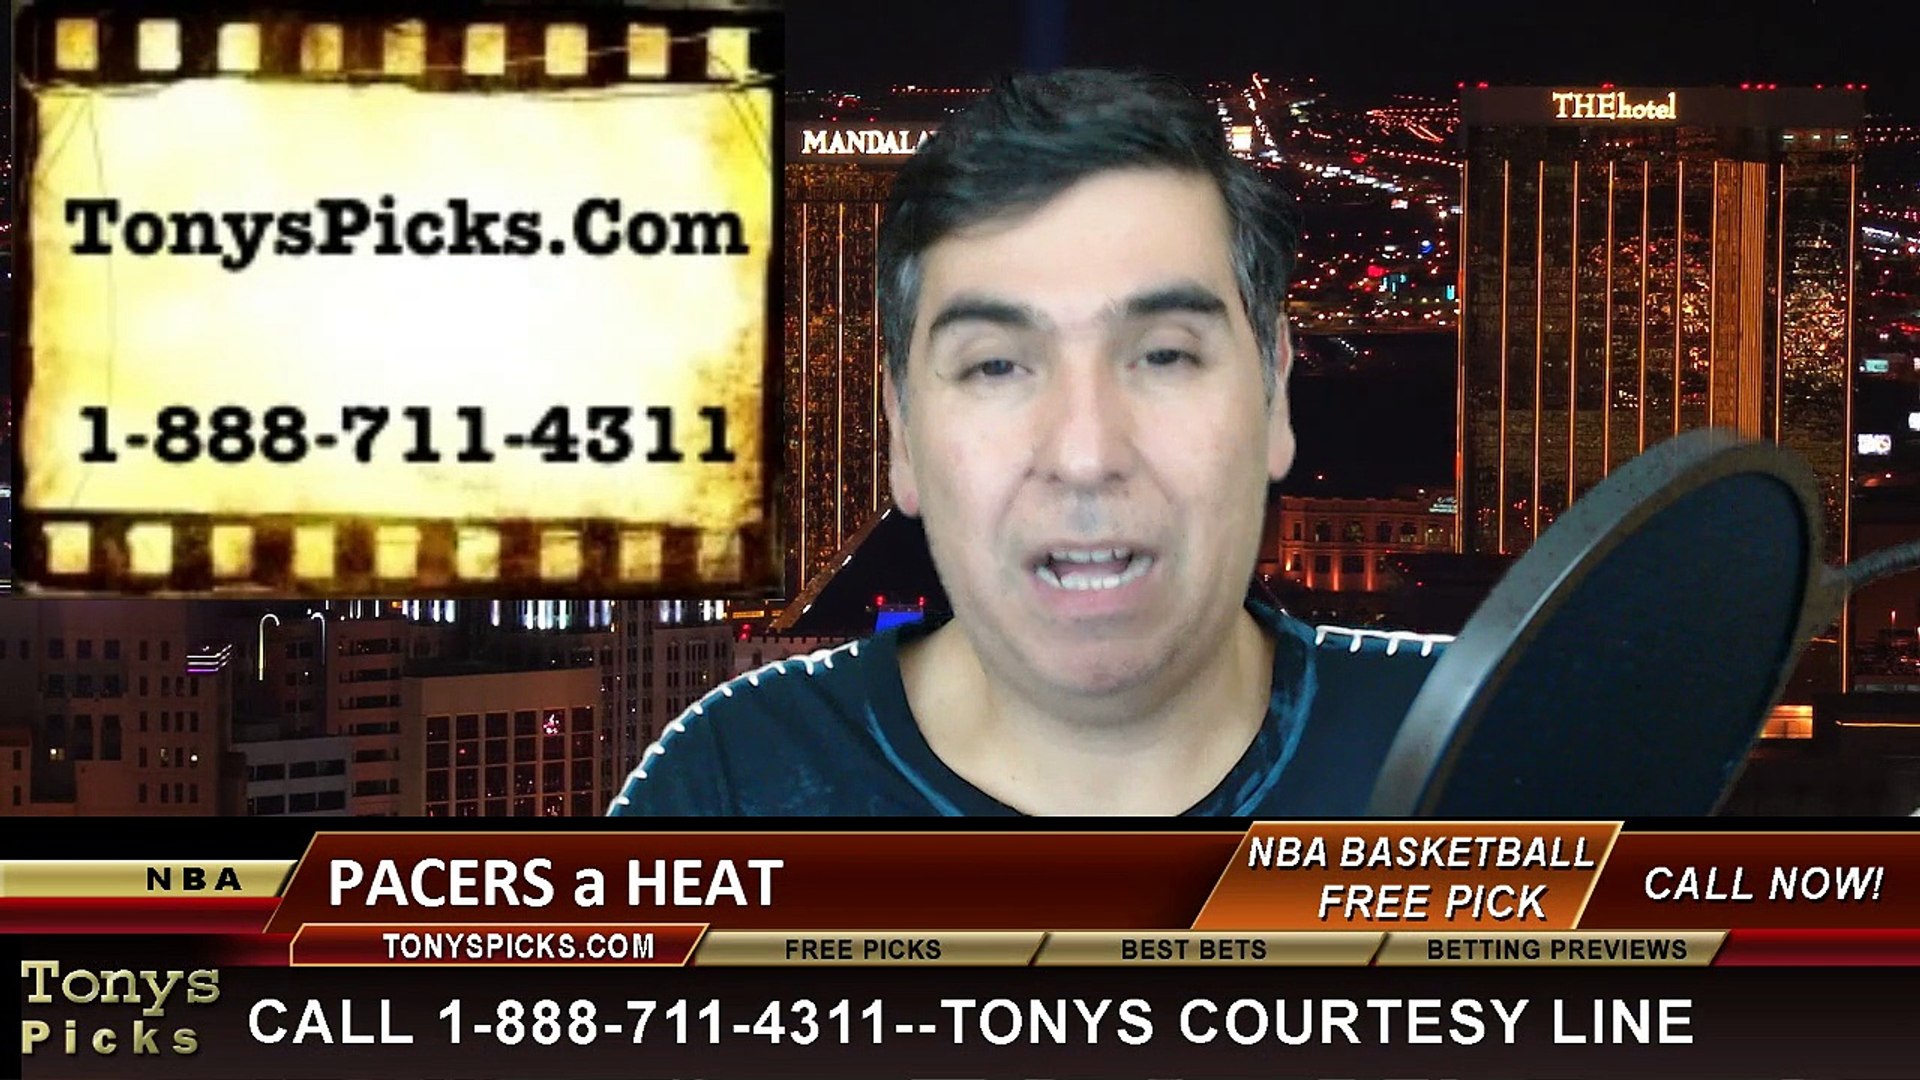 Miami Heat vs. Indiana Pacers Free Pick Prediction NBA Pro Basketball Odds Preview 1-23-2015